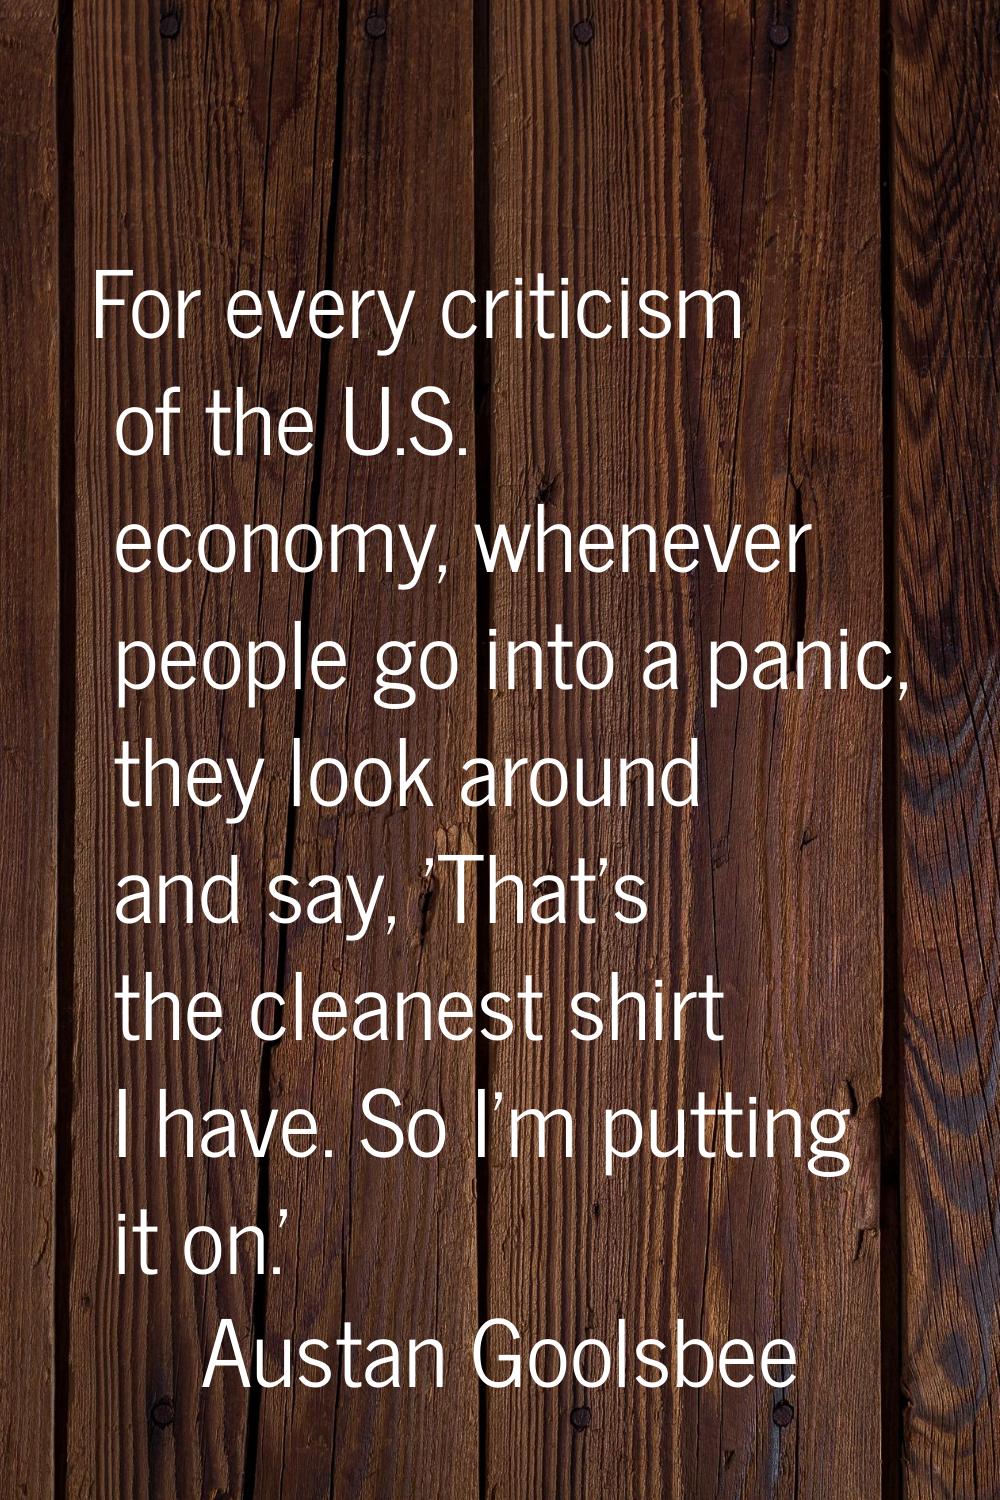 For every criticism of the U.S. economy, whenever people go into a panic, they look around and say,